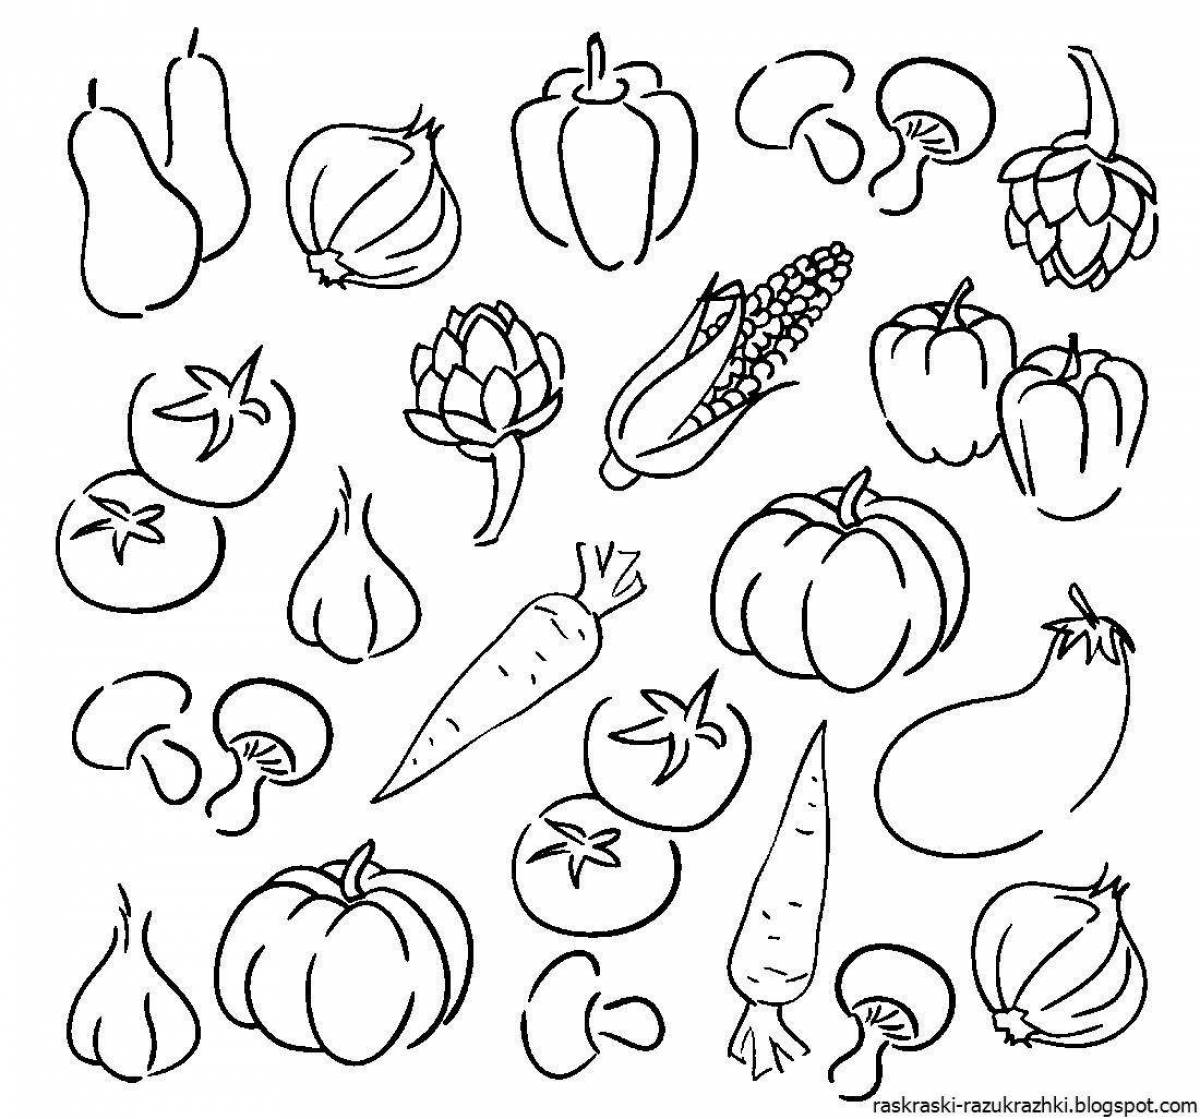 Coloring book funny vegetables and fruits